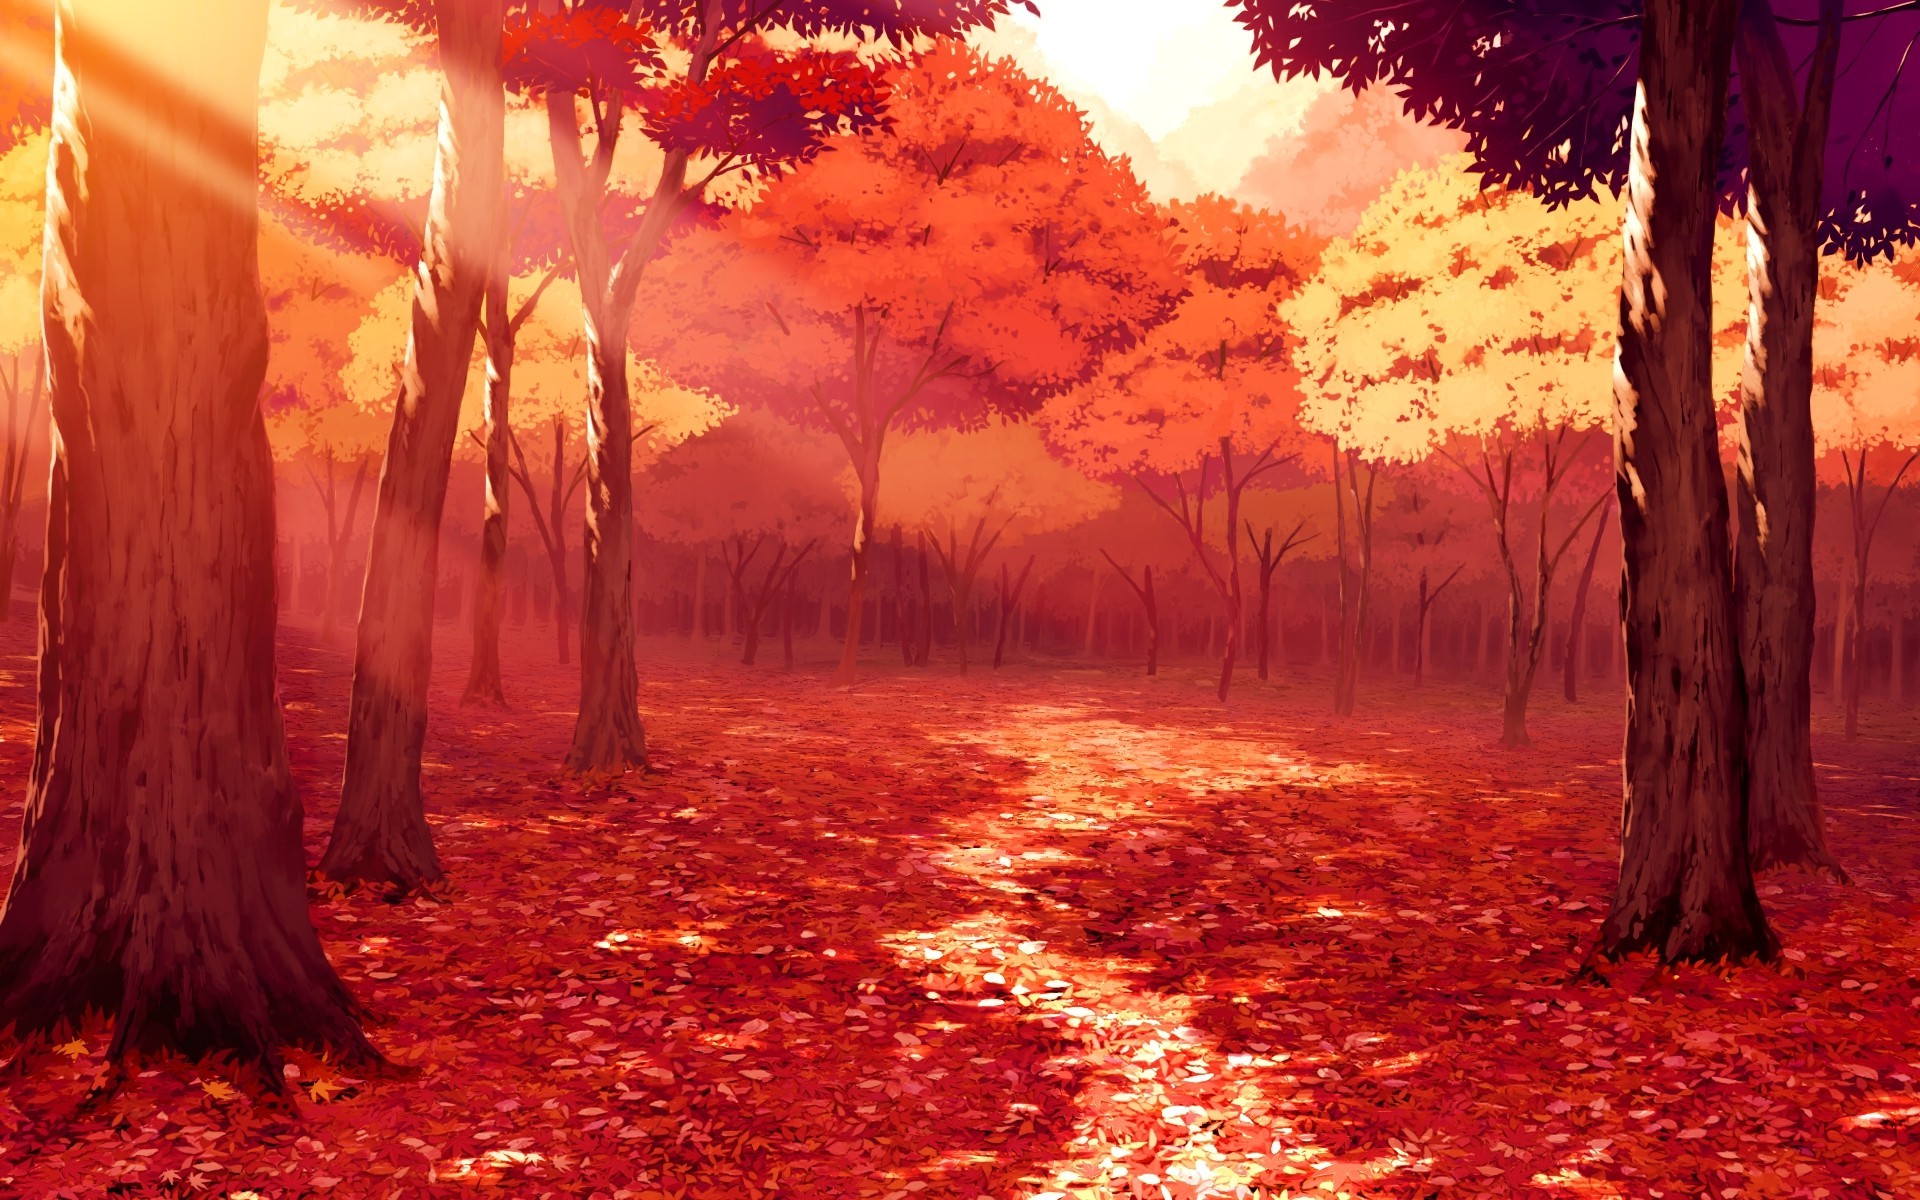 Wallpaper, sunlight, landscape, drawing, fall, leaves, anime, nature, grass, artwork, branch, sunrise, evening, tree, autumn, leaf, dawn, 1920x1200 px, woodland, computer wallpaper, afterglow, geological phenomenon, red sky at morning, temperate broadleaf